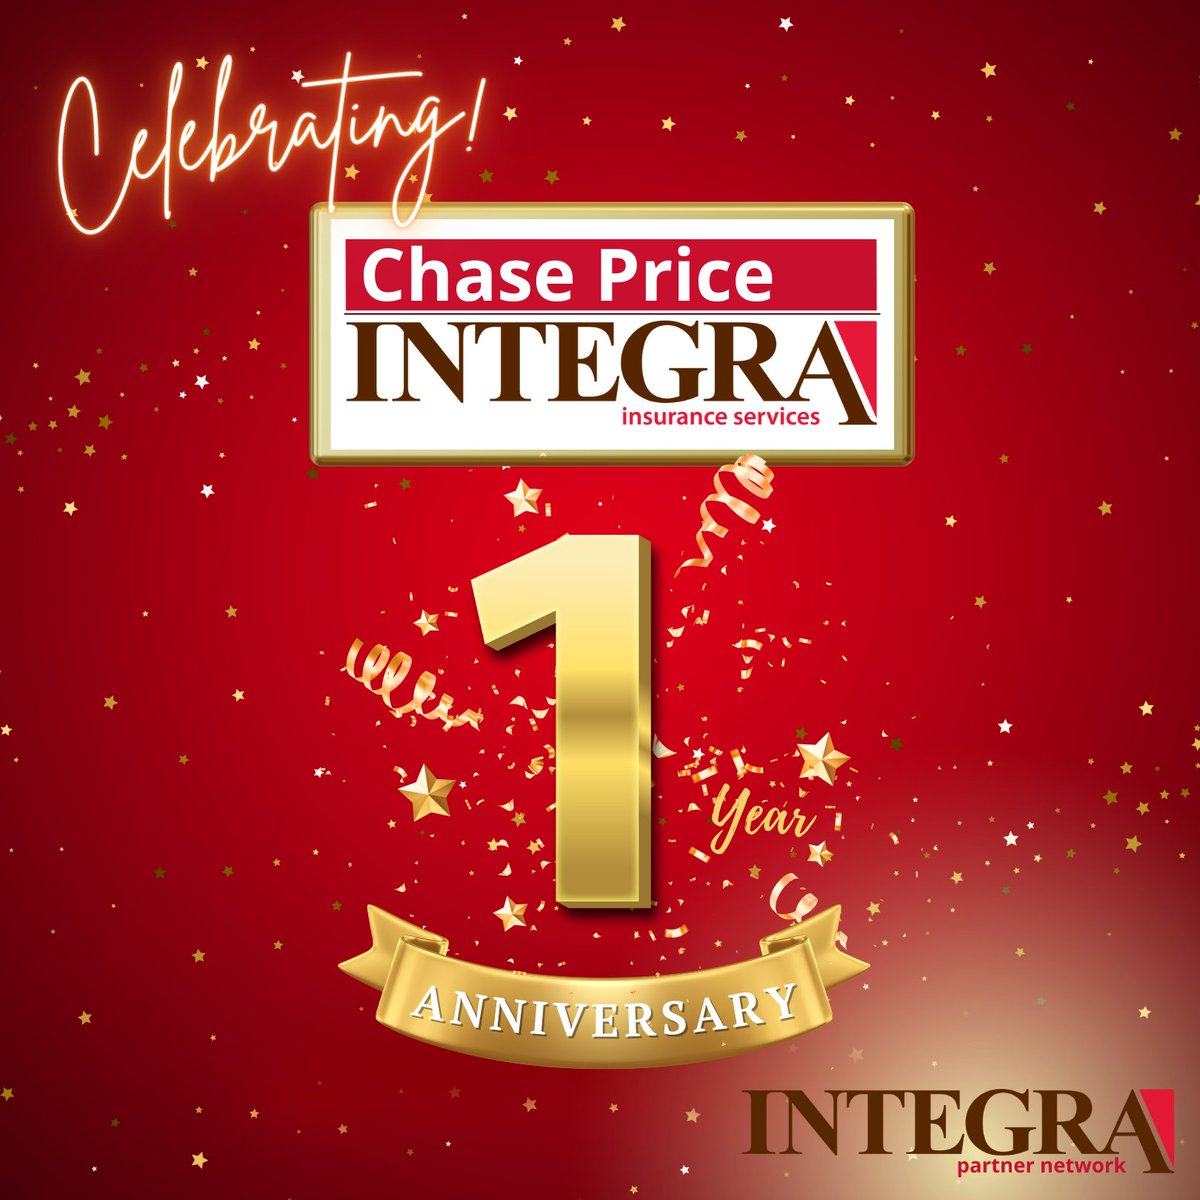 Excited to celebrate one year of success with Chase Price Integra Insurance and the Integra Partner Network!

Are you ready to find your way with Integra?

#integrapartnernetwork #independentagent #findyourway #integra #insurance #insuranceagent #insuranceagency #integrainspires